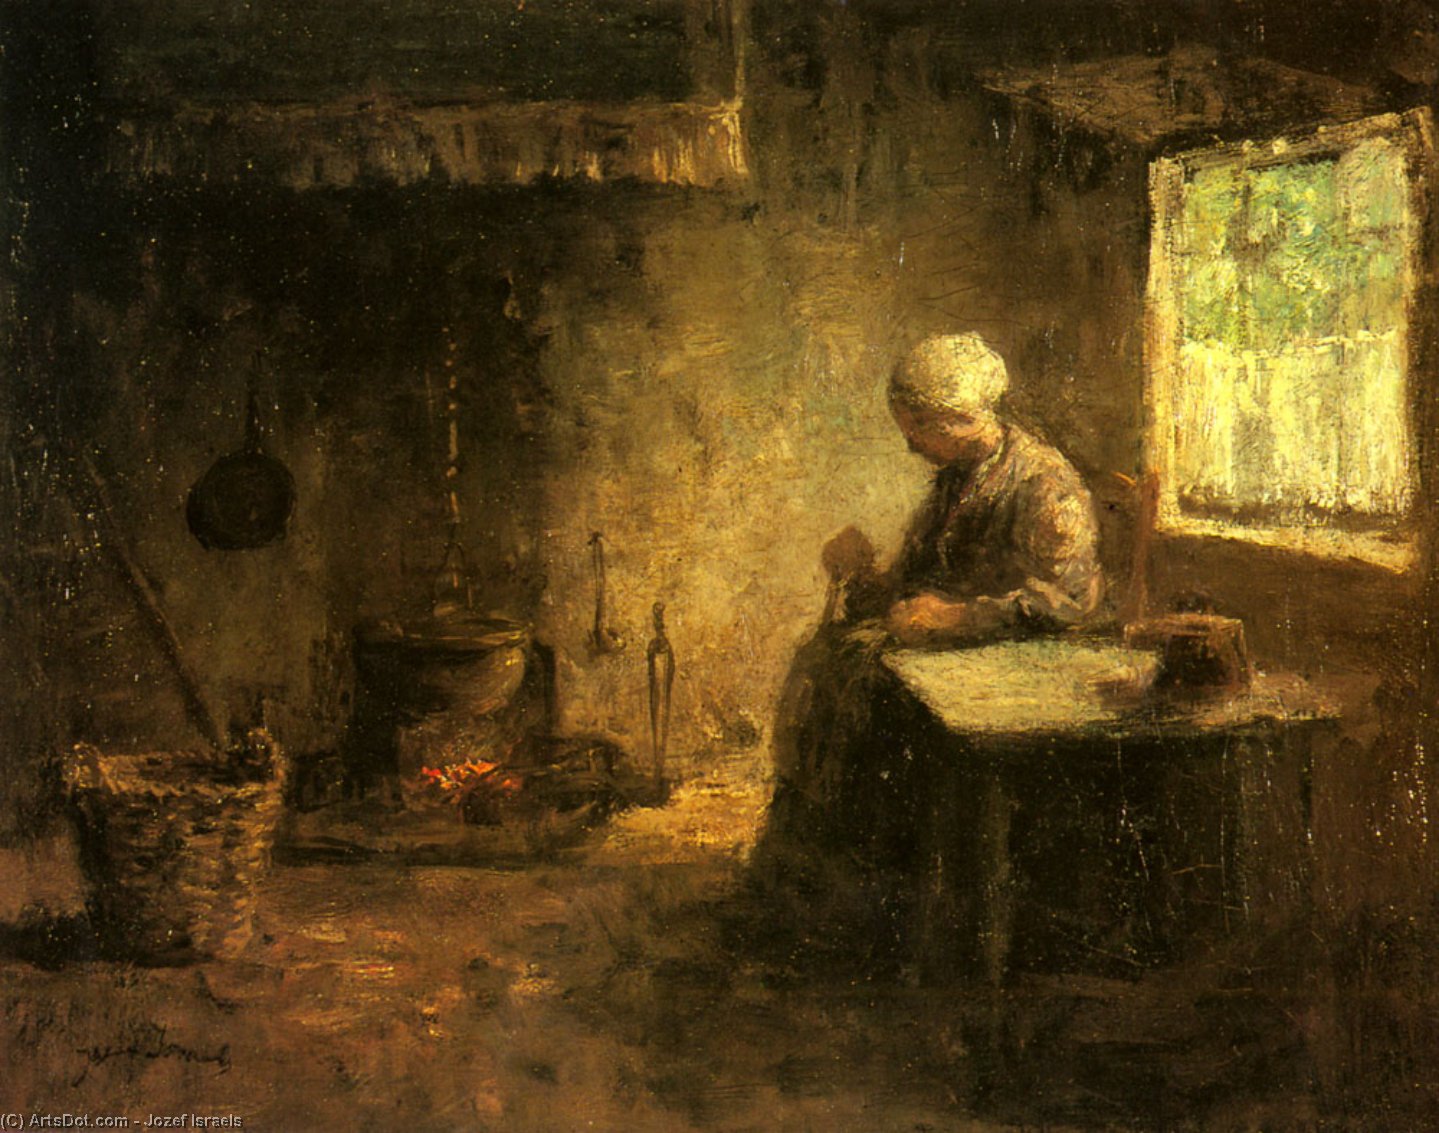 Order Art Reproductions Peasant Woman by a Hearth by Jozef Israels (1824-1911, Netherlands) | ArtsDot.com